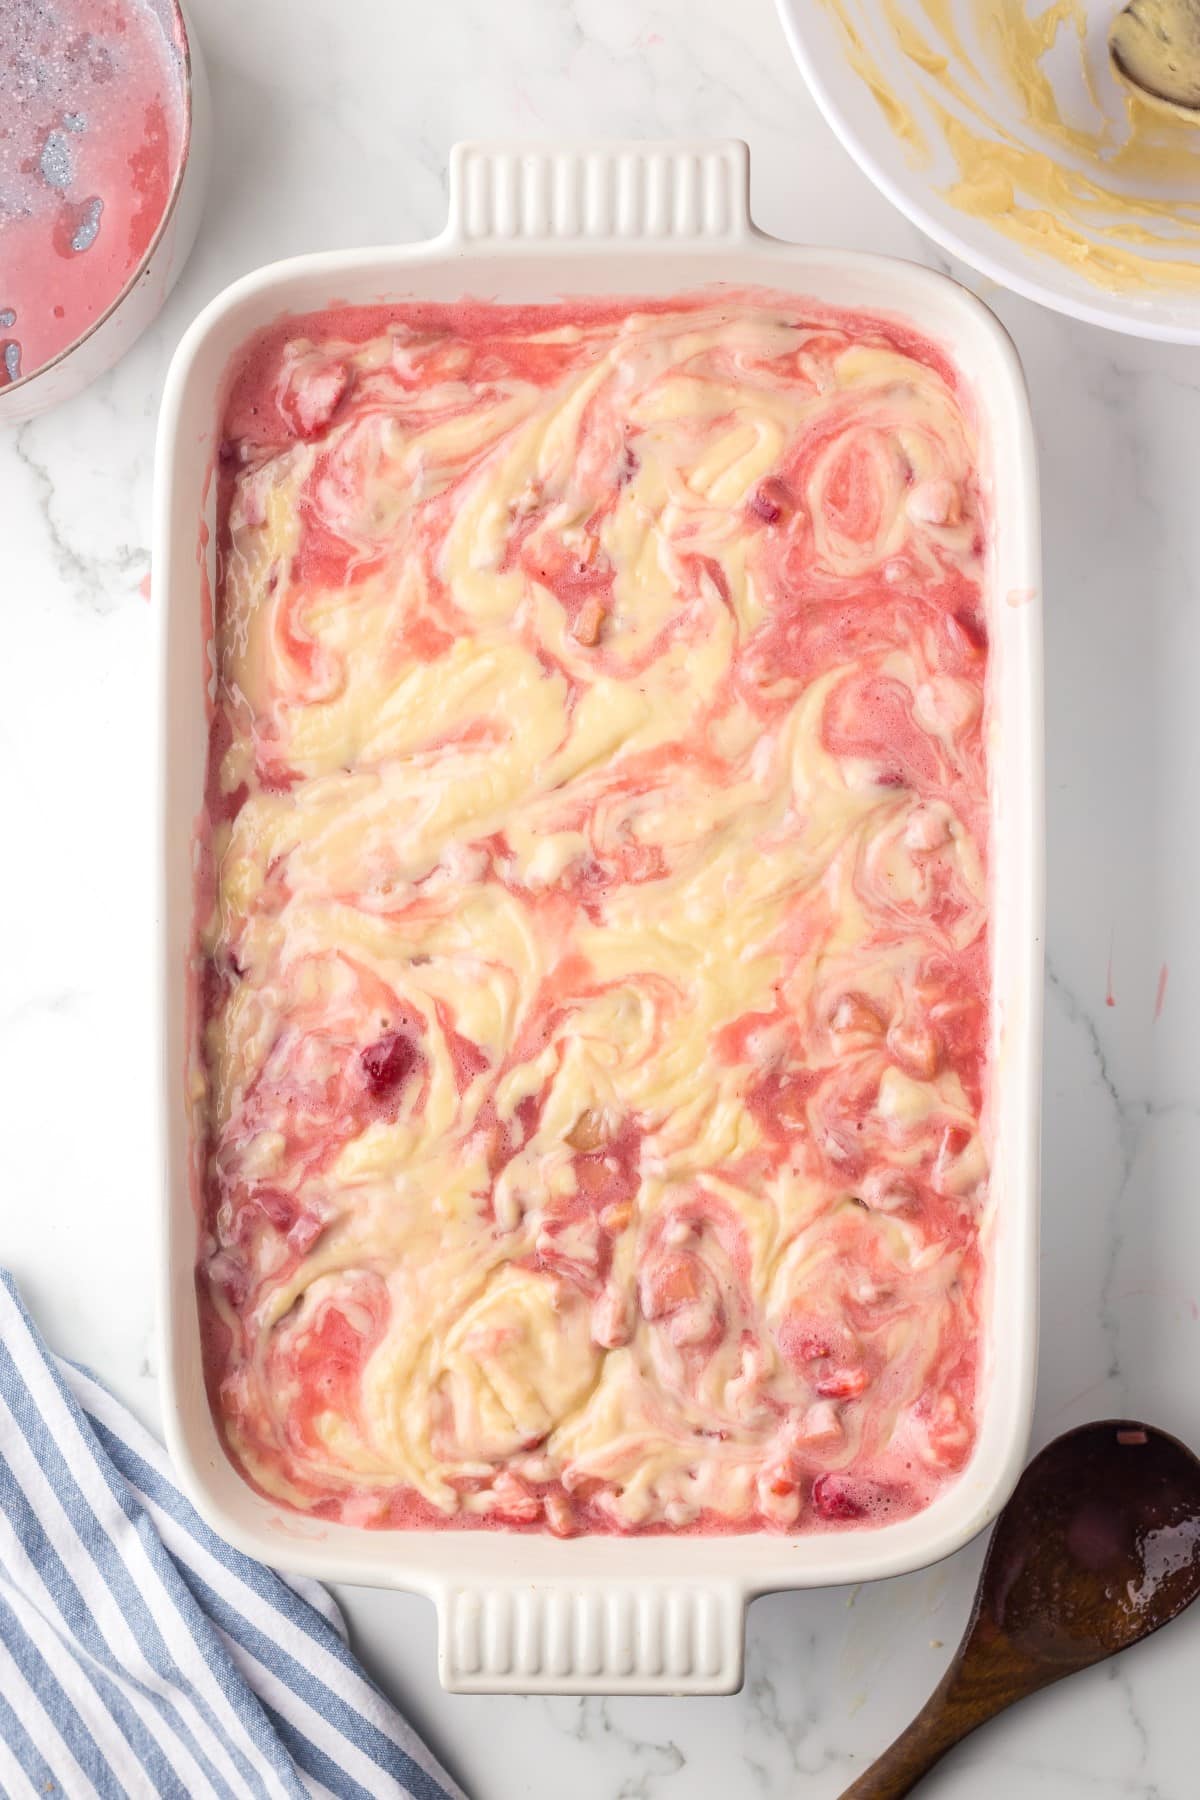 Rhubarb and strawberry layer added along with final layer of batter and spread and swirled together. 